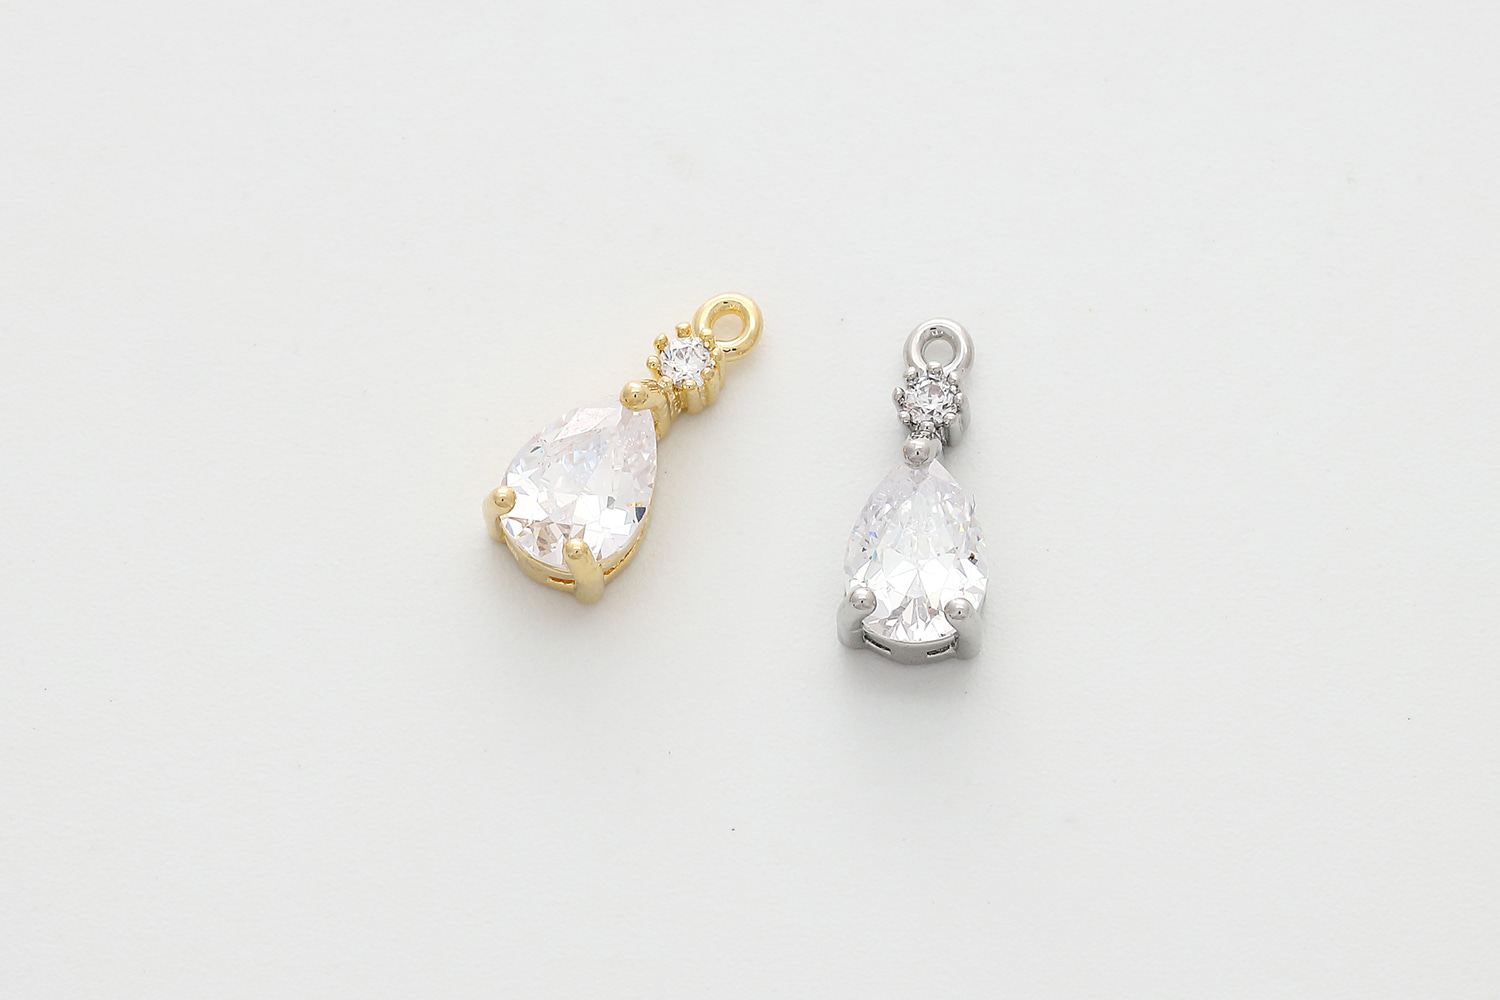 [S67-VC2] Cubic drop charm,12.5x5.5mm including 1mm loop, Brass, Cubic zirconia, Star pendant, 1 piece (S67-G6, S67-G6R)